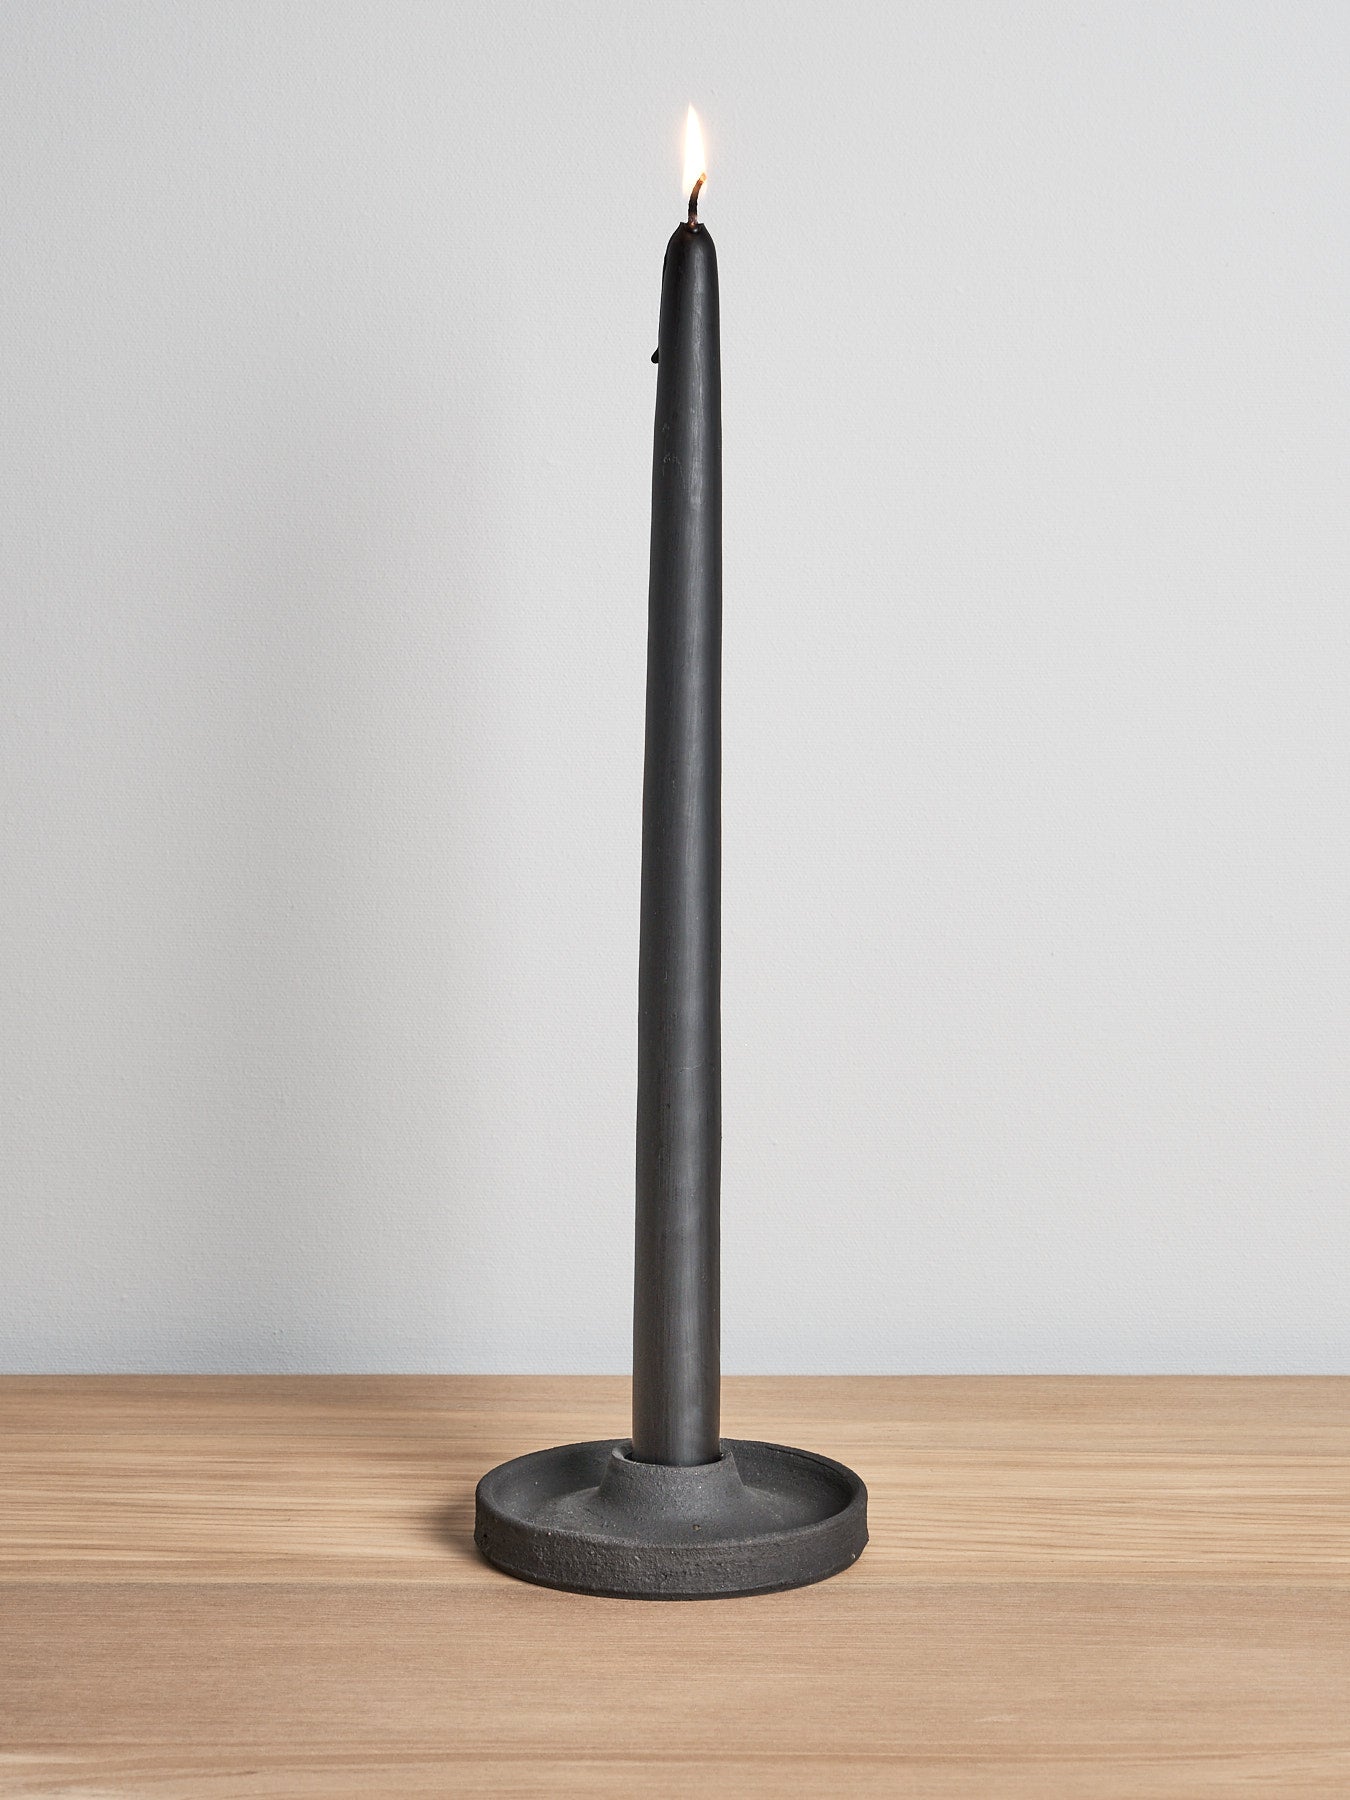 A Candle Holder – Black by deborah sweeney sitting on top of a wooden table.